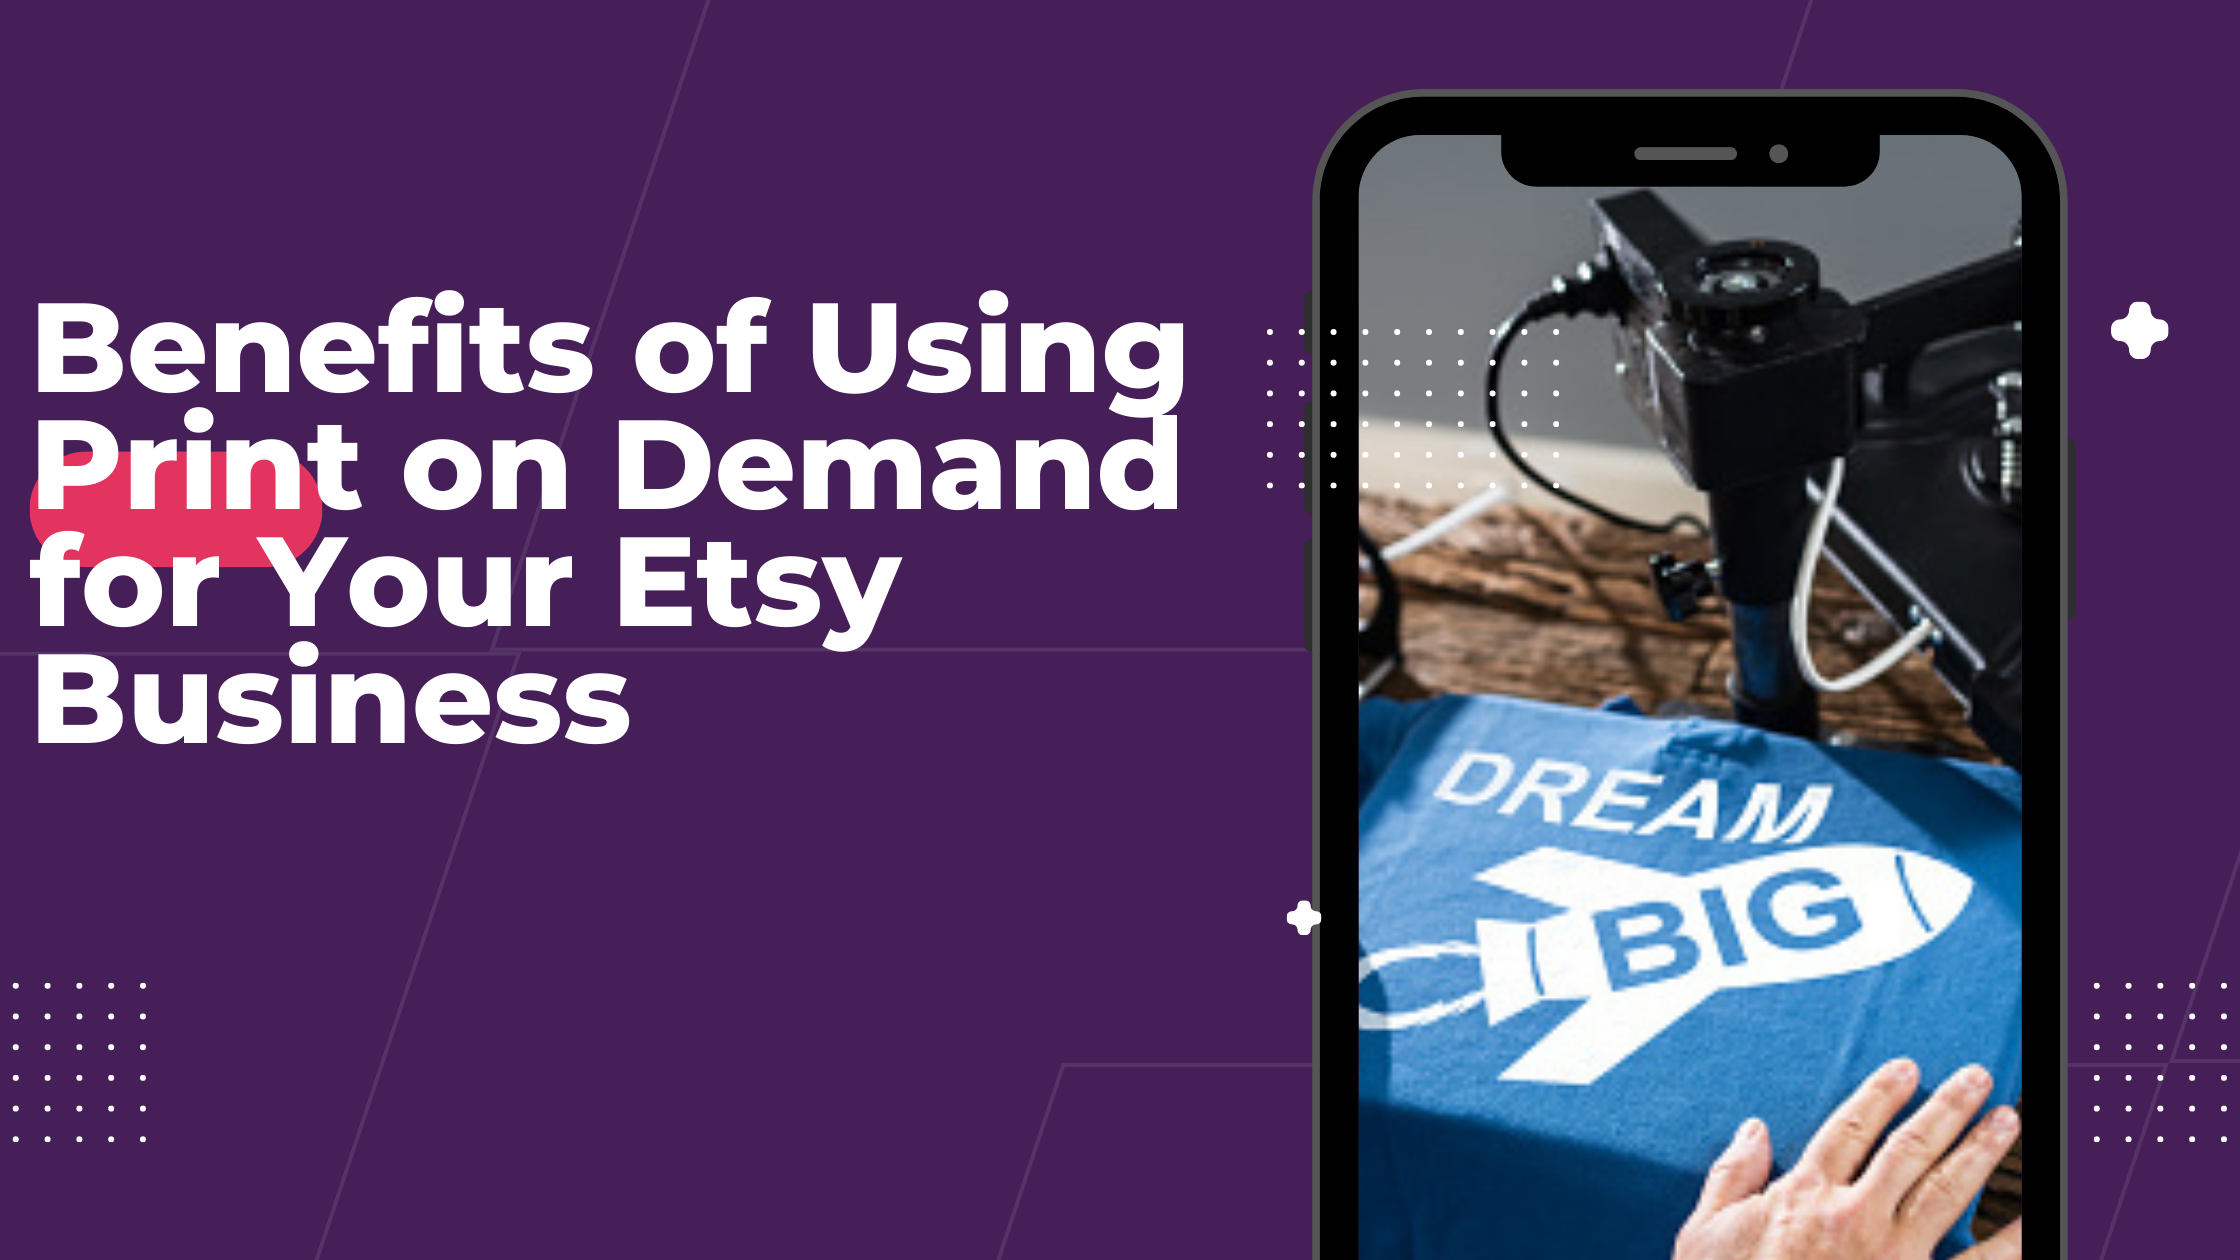 The Benefits of Using Print on Demand for Your Etsy Business